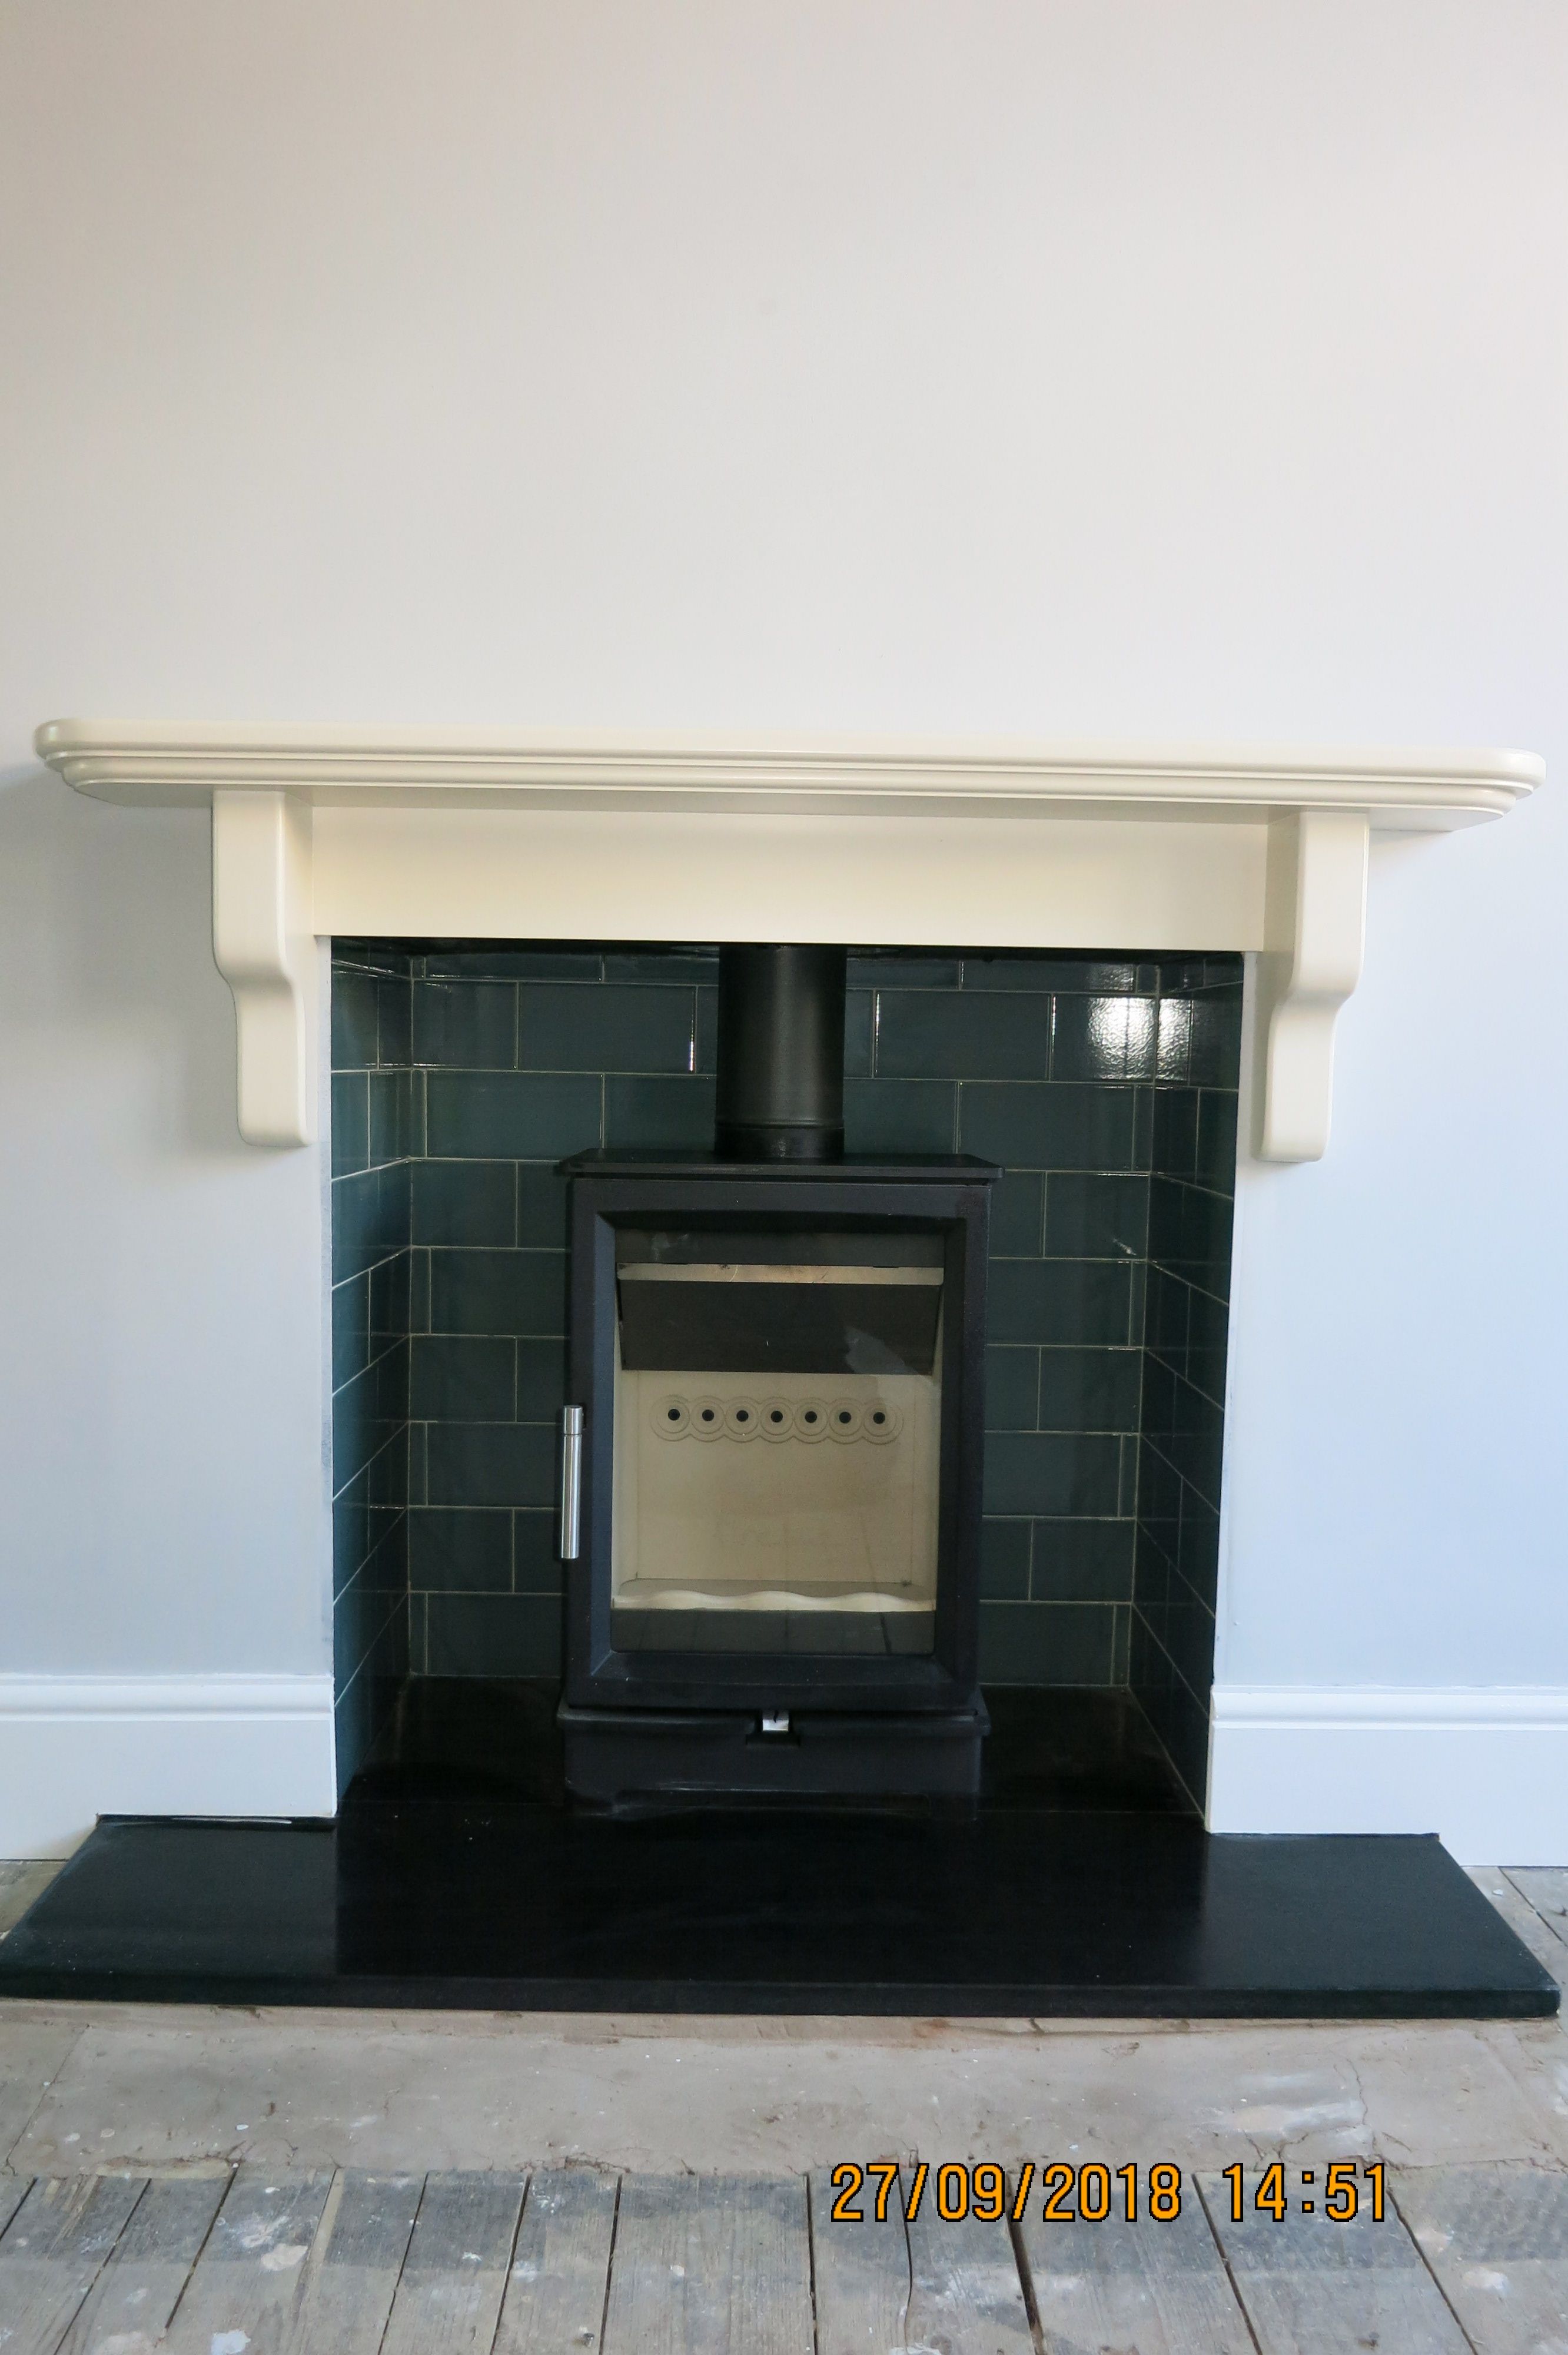 Fireplace Hearth Mat Inspirational How Nice is This A Woodtec 5kw Wood Burning Stove Green